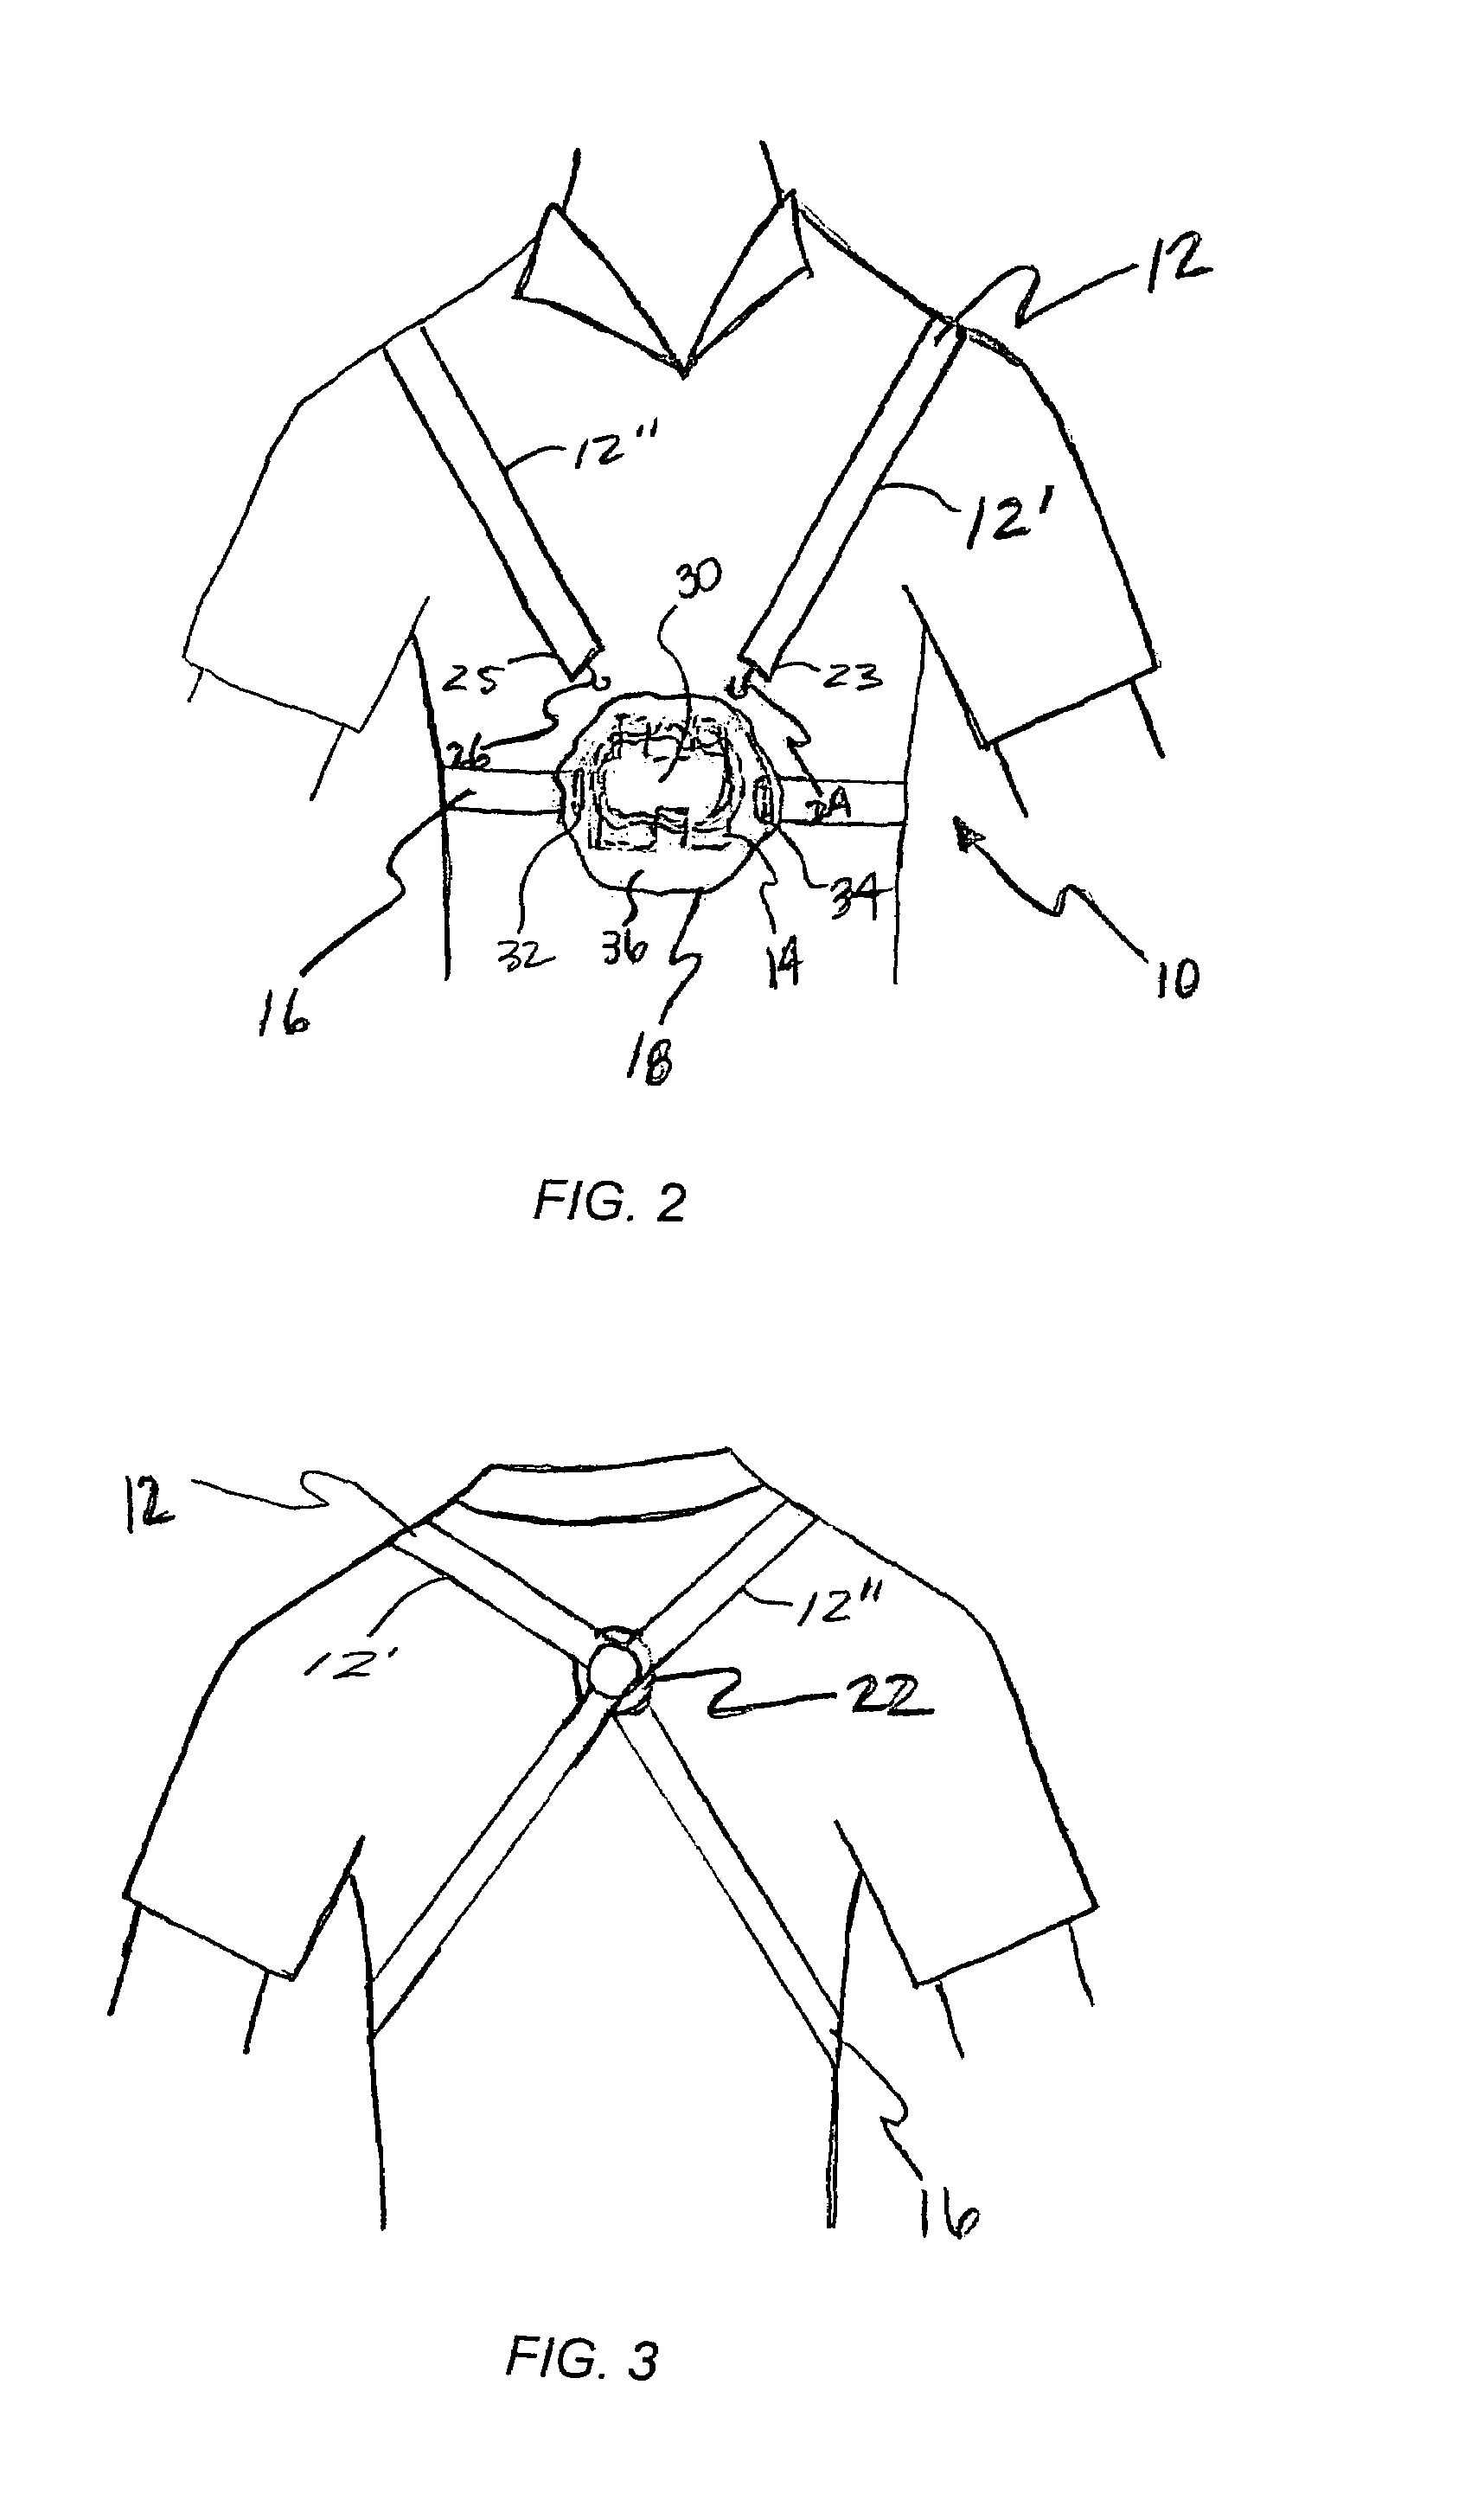 Device for restraining and protecting neckstrap-supported user equipment